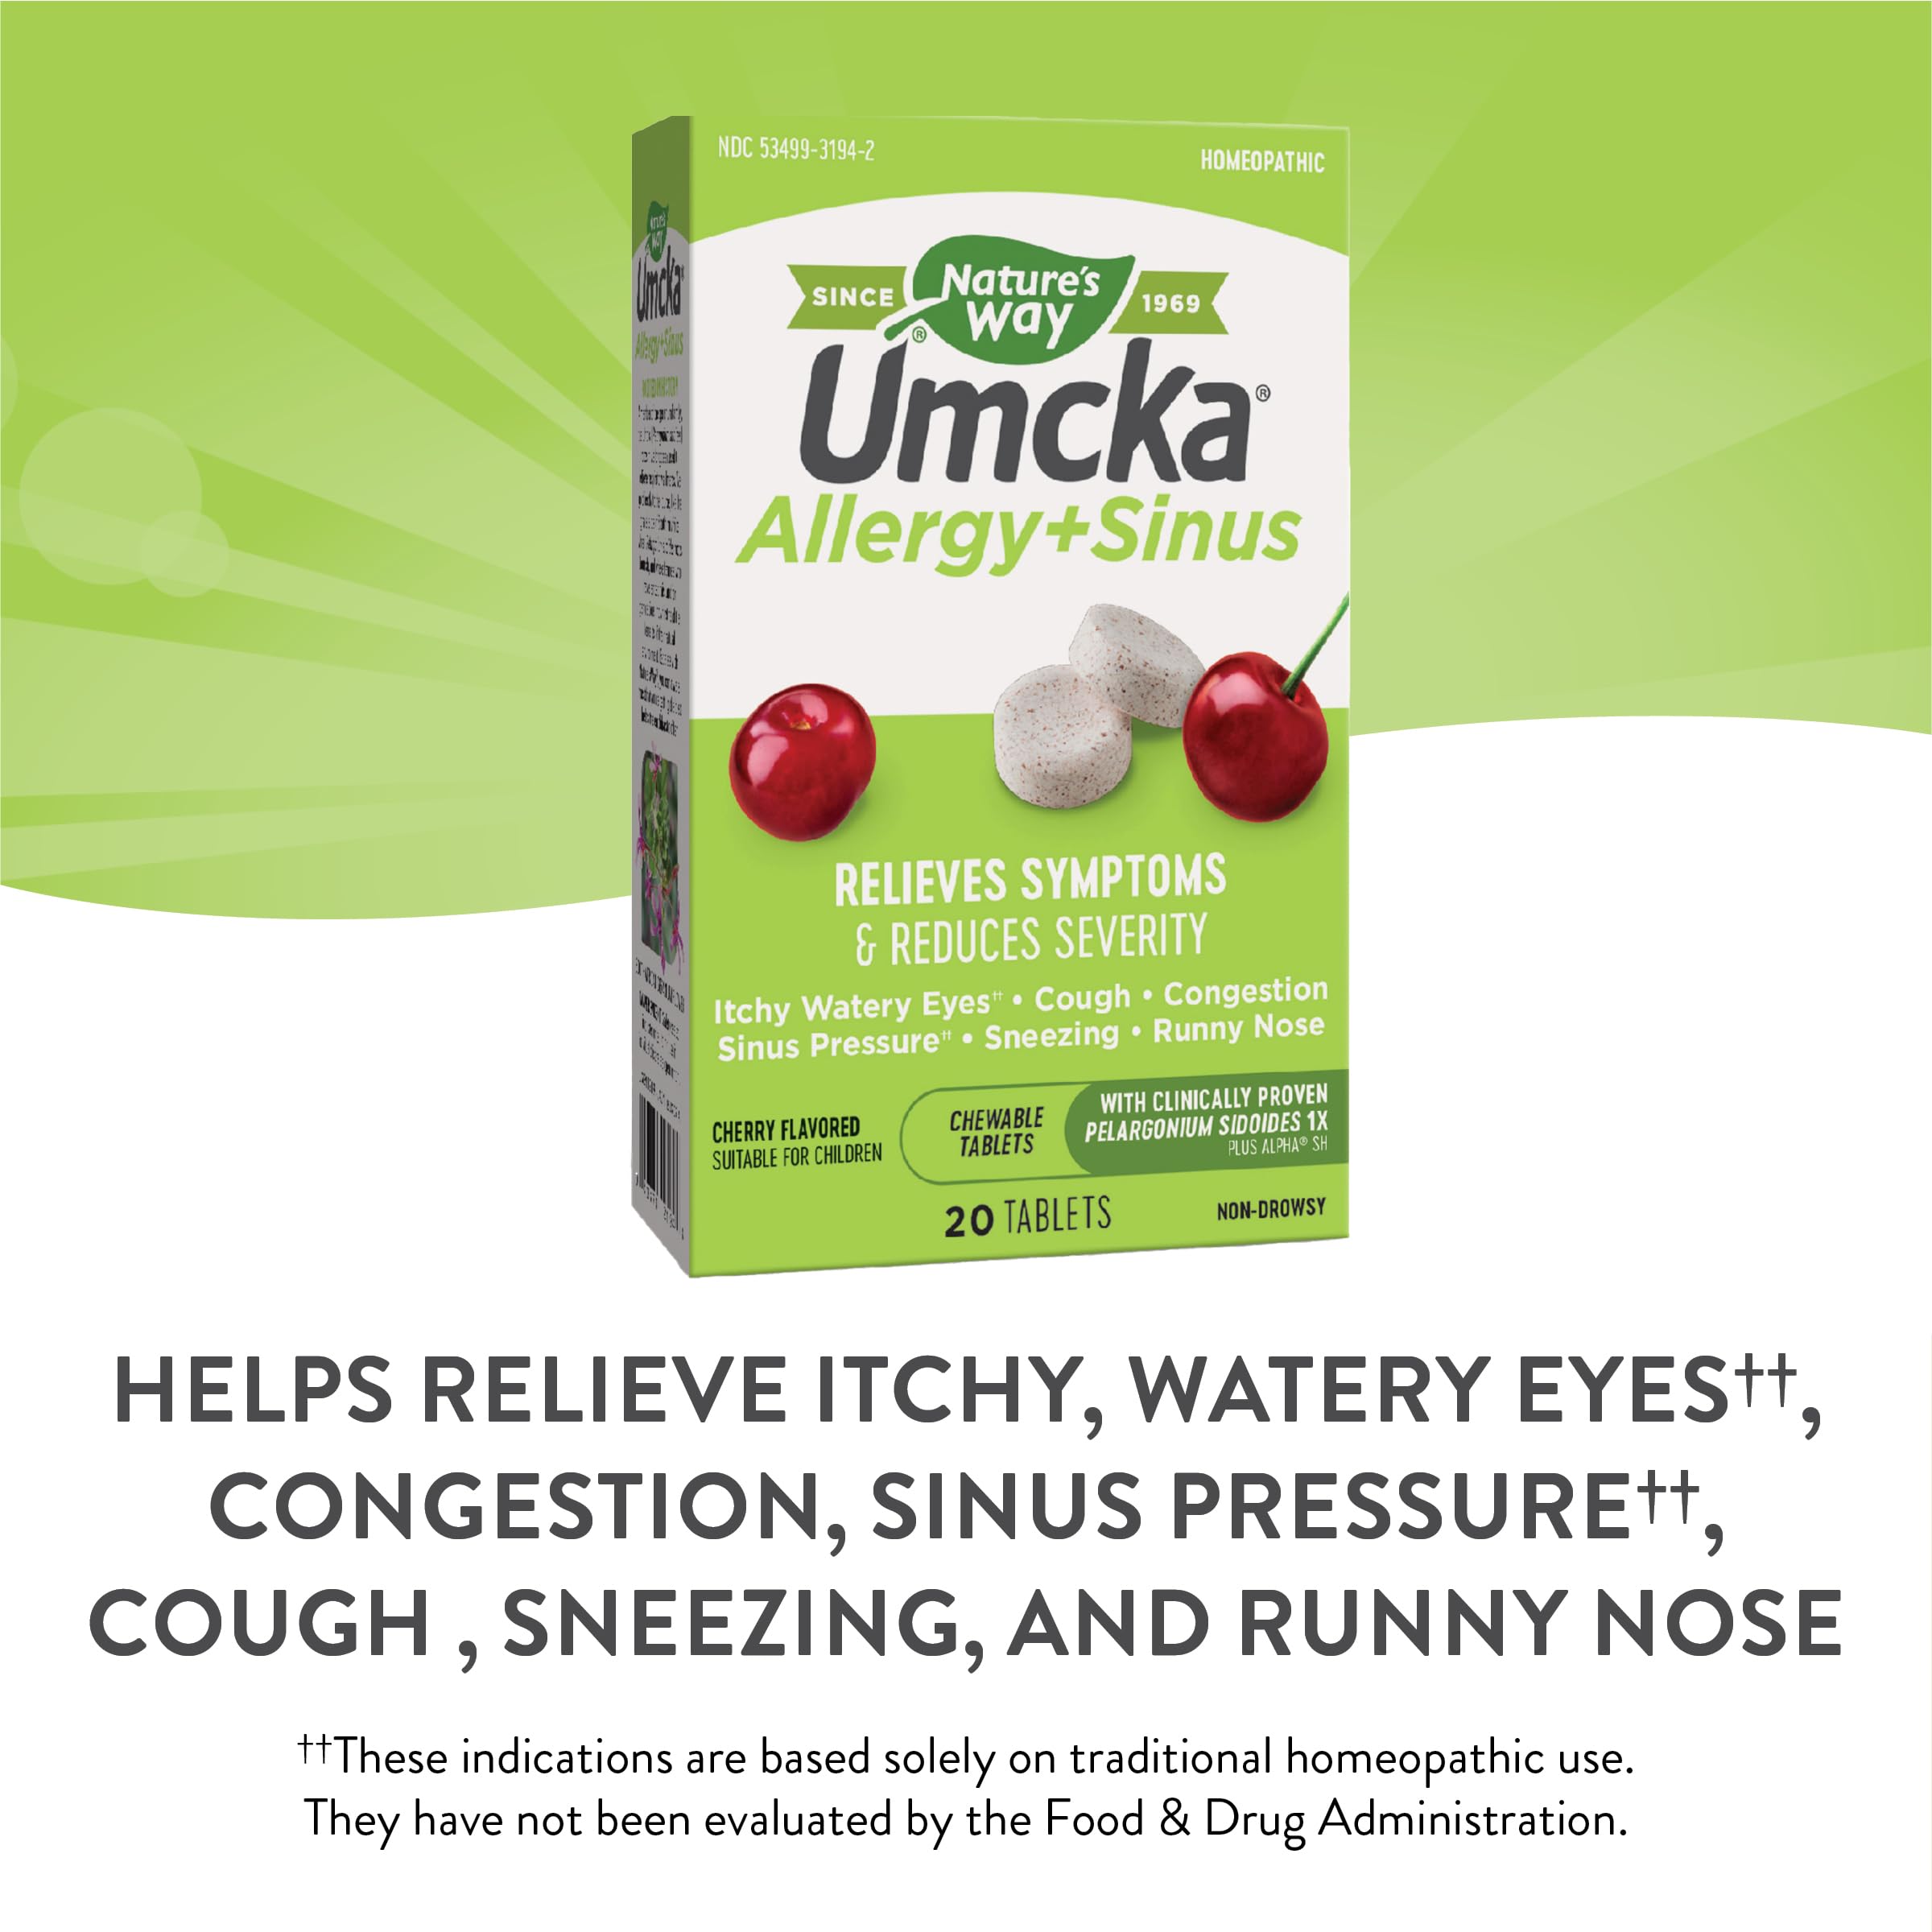 Nature's Way Umcka ColdCare Homeopathic, Shortens Colds & Umcka Allergy+Sinus Homeopathic, Sneezing, Runny Nose